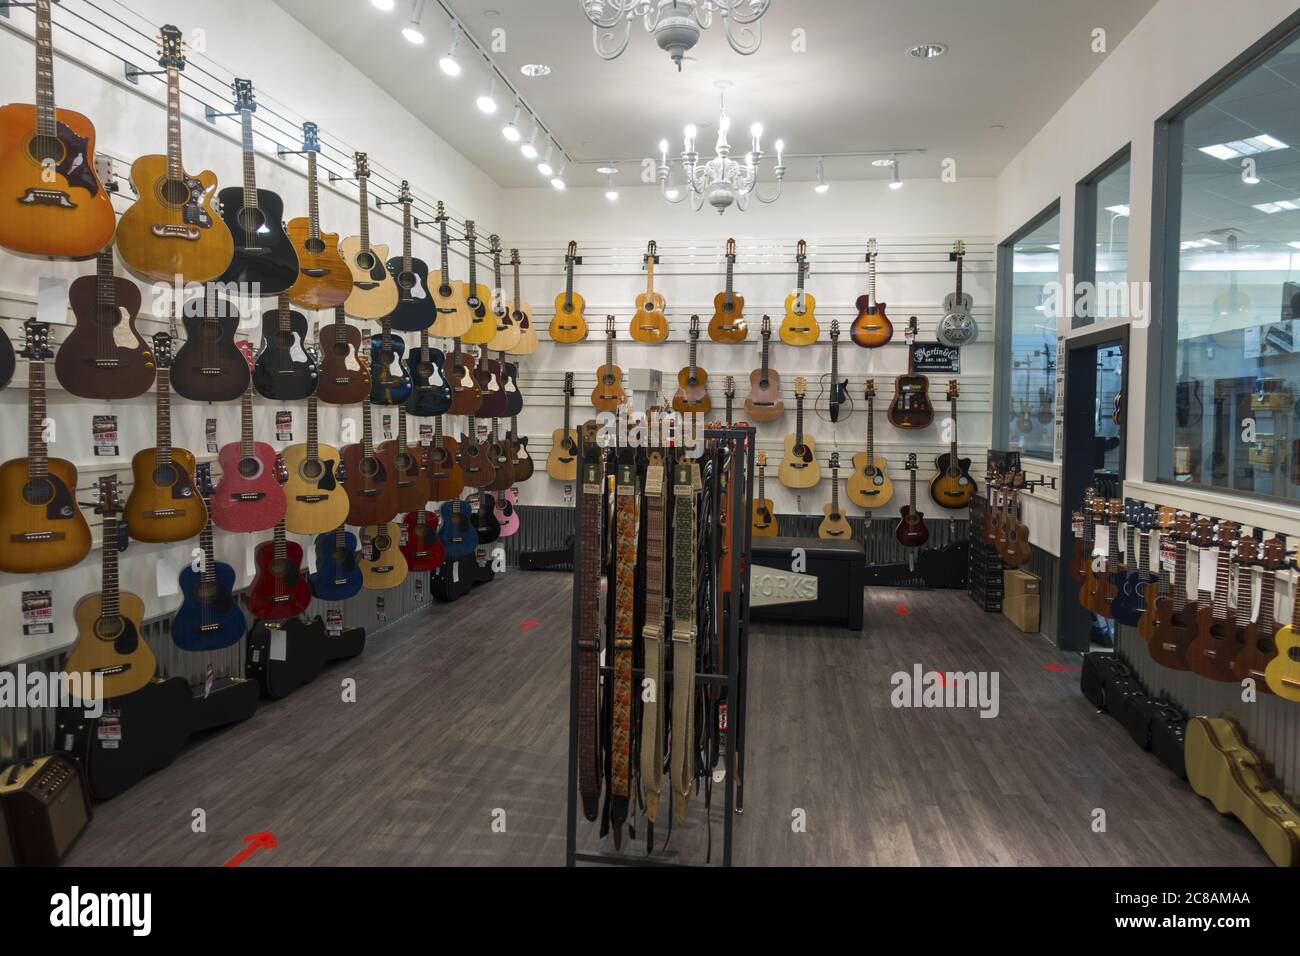 Acoustic and Electrical Music Instruments on Display in Guitar Shop Interior. Calgary, Alberta Market Mall Shopping Centre Stock Photo